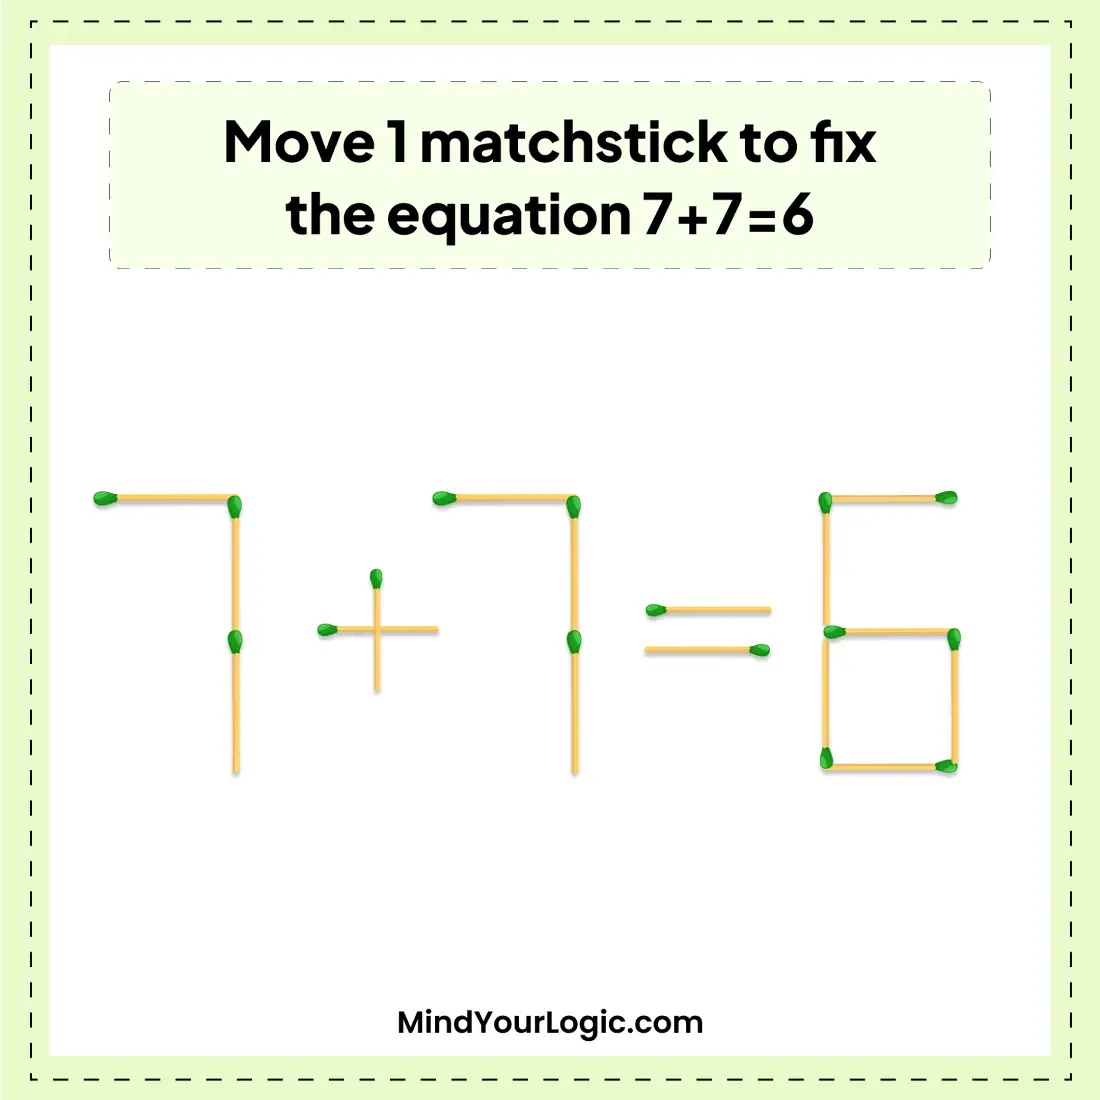 move-1-matchstick-to-fix-the-equation-7+7=6-matchstick-answer-img-1